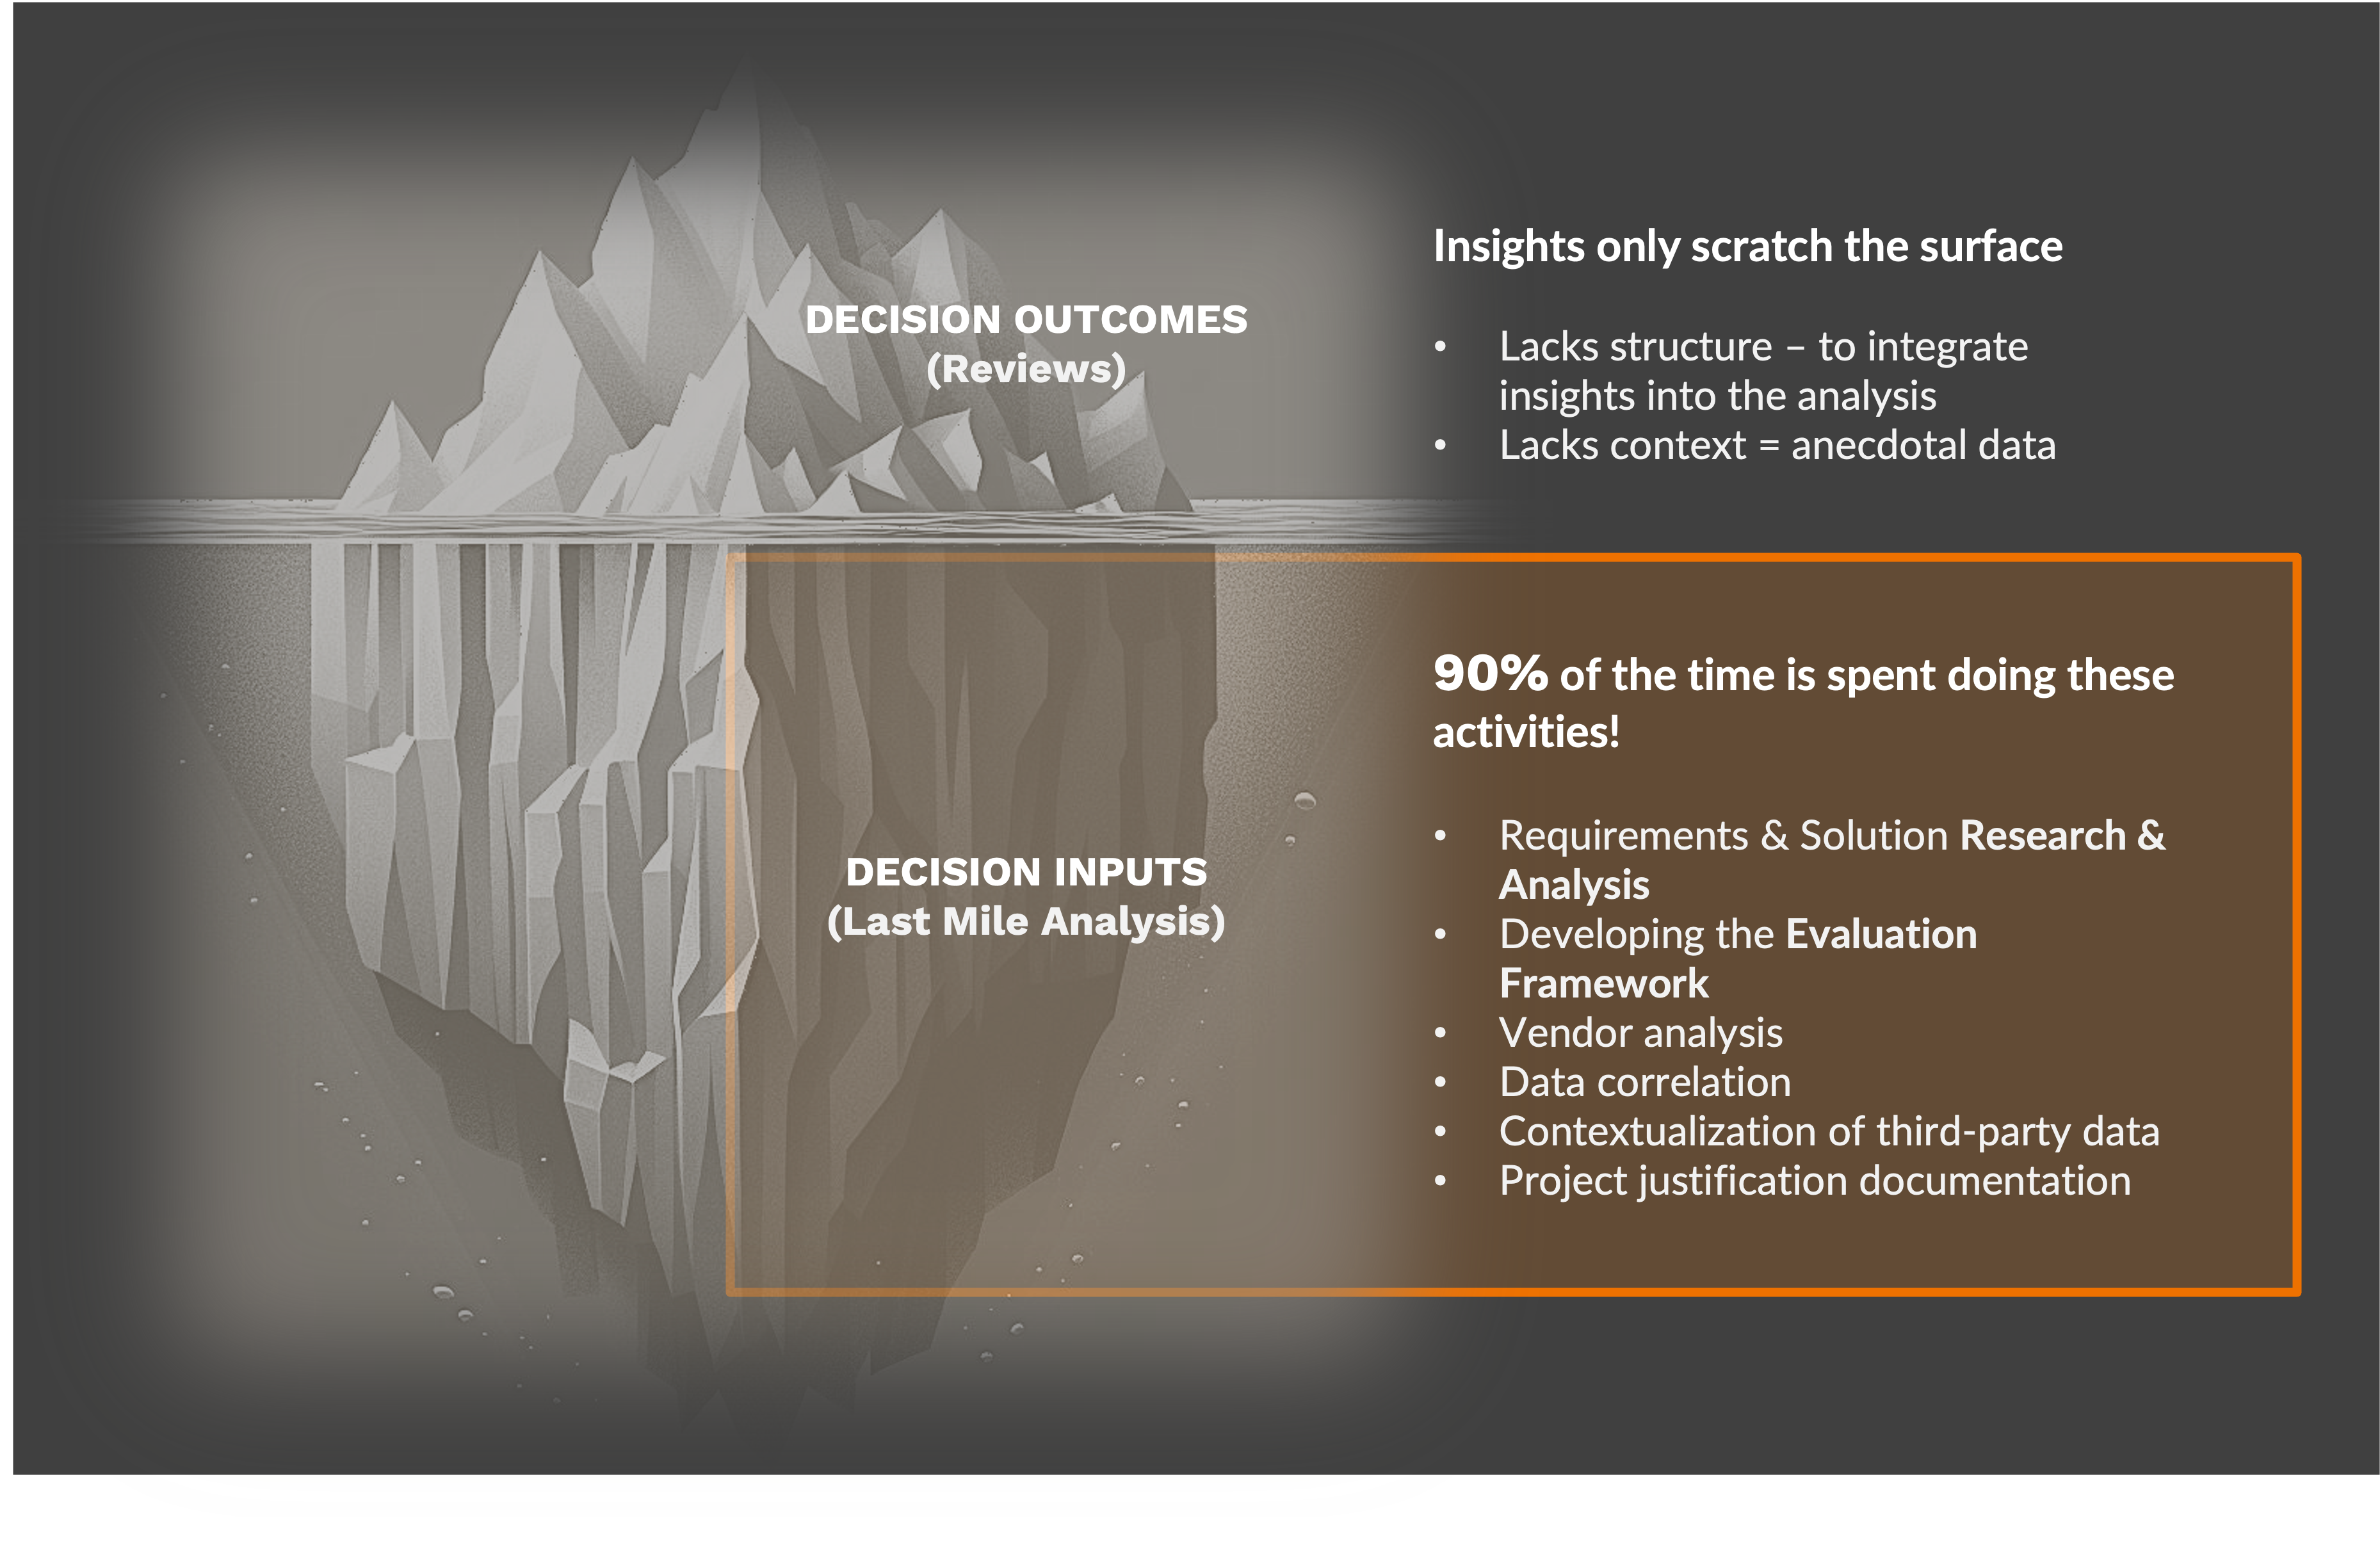 Iceberg analogy illustrating the visible decision outcomes (reviews) above water and the hidden decision inputs (last mile analysis) below water in the cybersecurity procurement process.